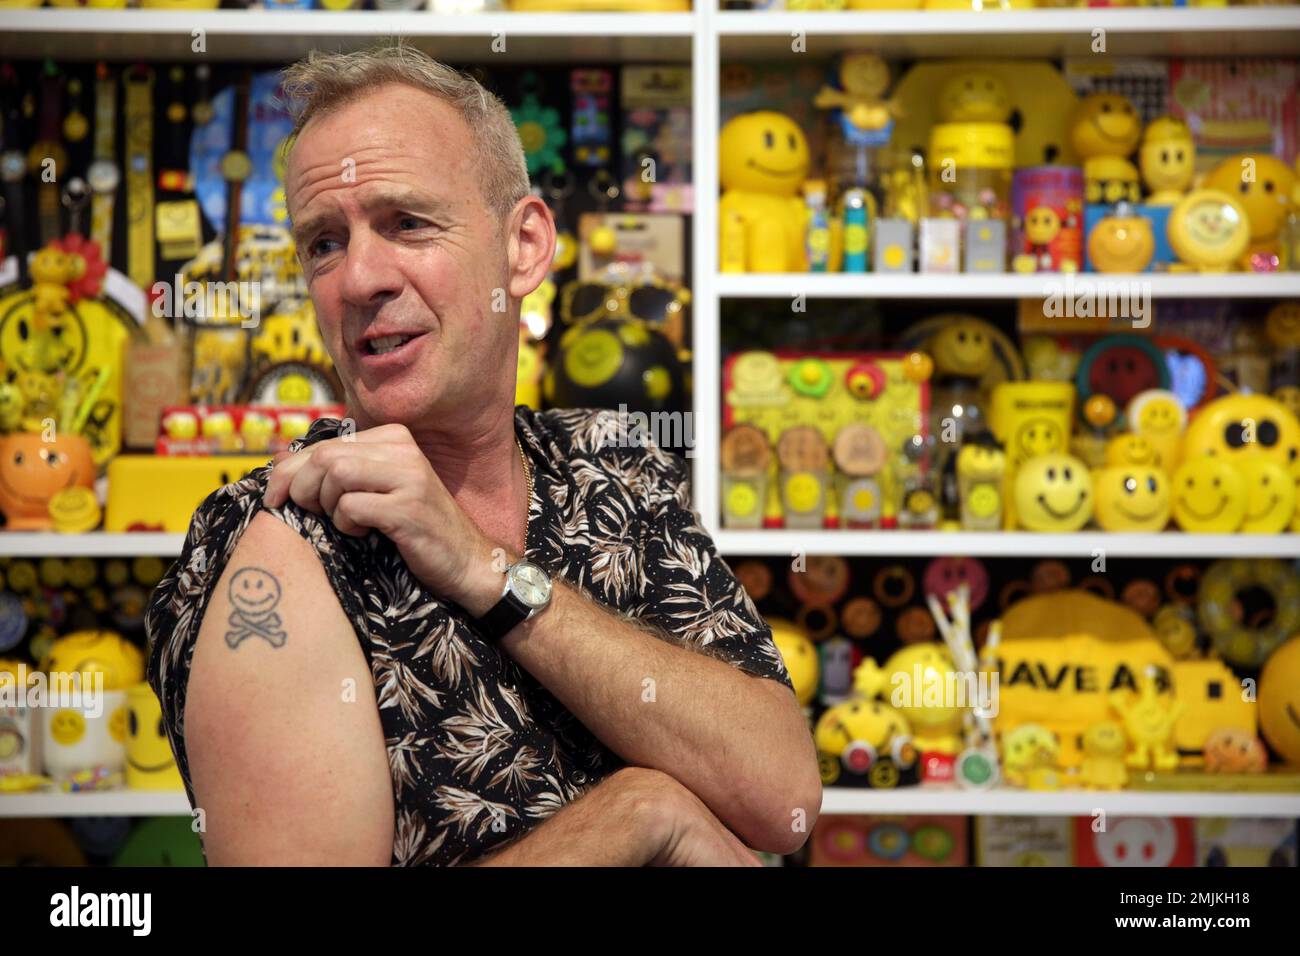 Norman Cook, aka Fat Boy Slim, shows his tattoo in front of his collection of objects featuring the smiley face symbol on shelves at the Underdogs Gallery in Lisbon, Friday, June 21,